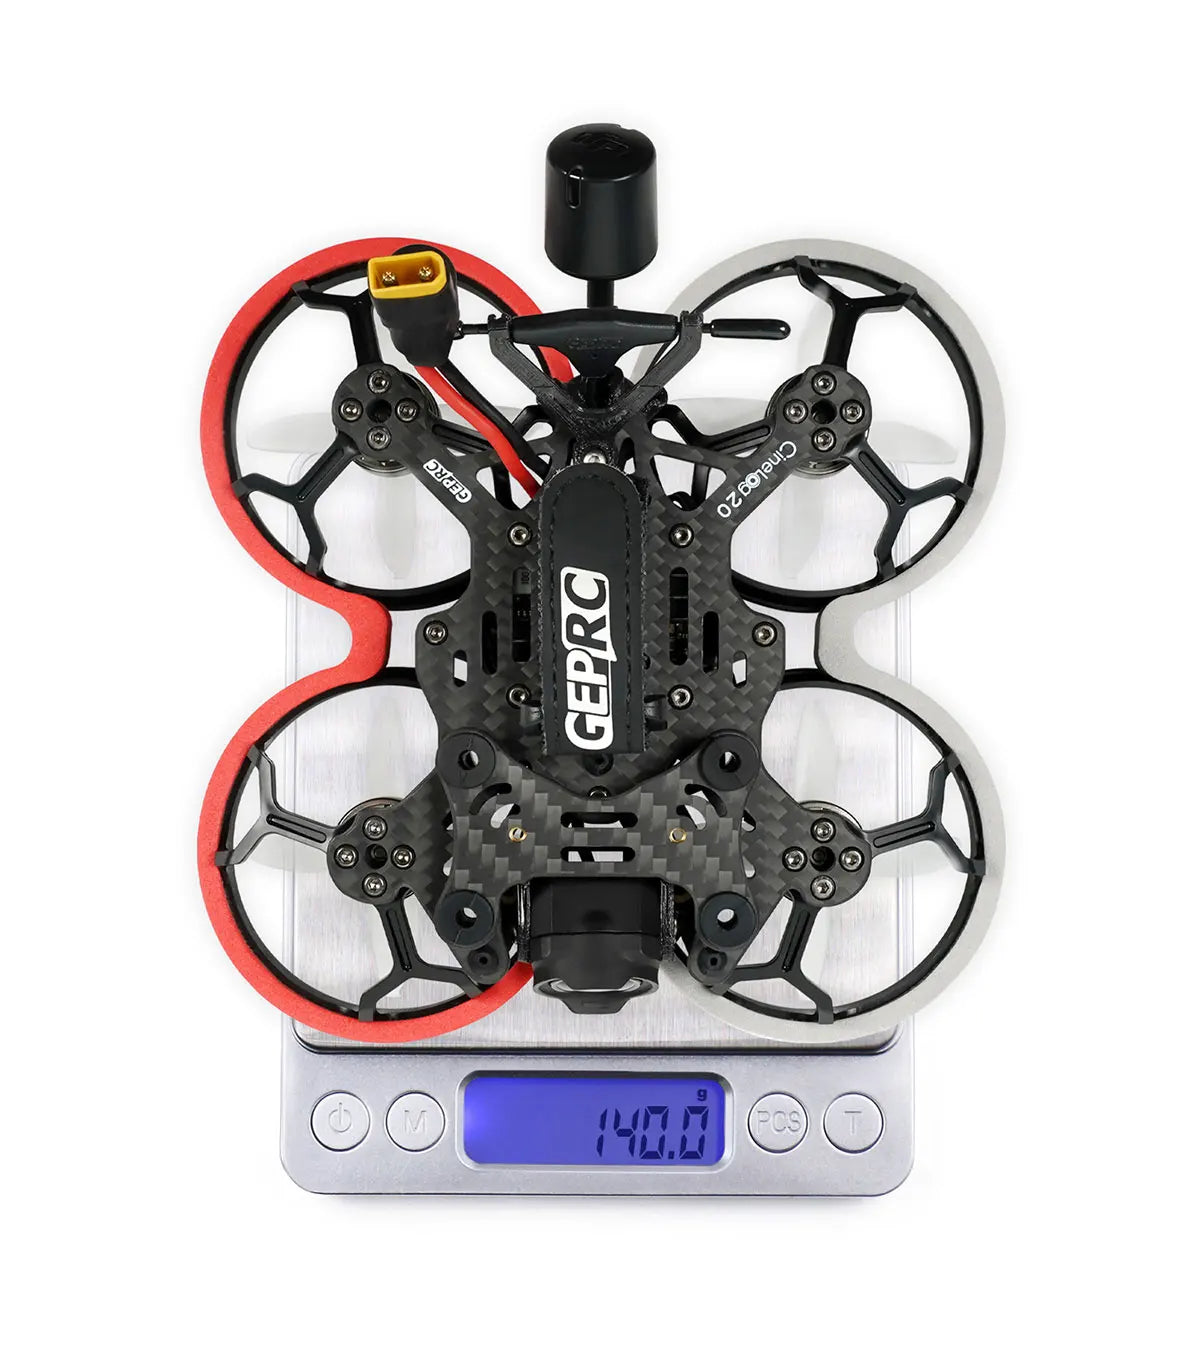 GEPRC Cinelog20 Analog FPV Drone, the CineLog20 is a lightweight pusher design . the camera gimbal